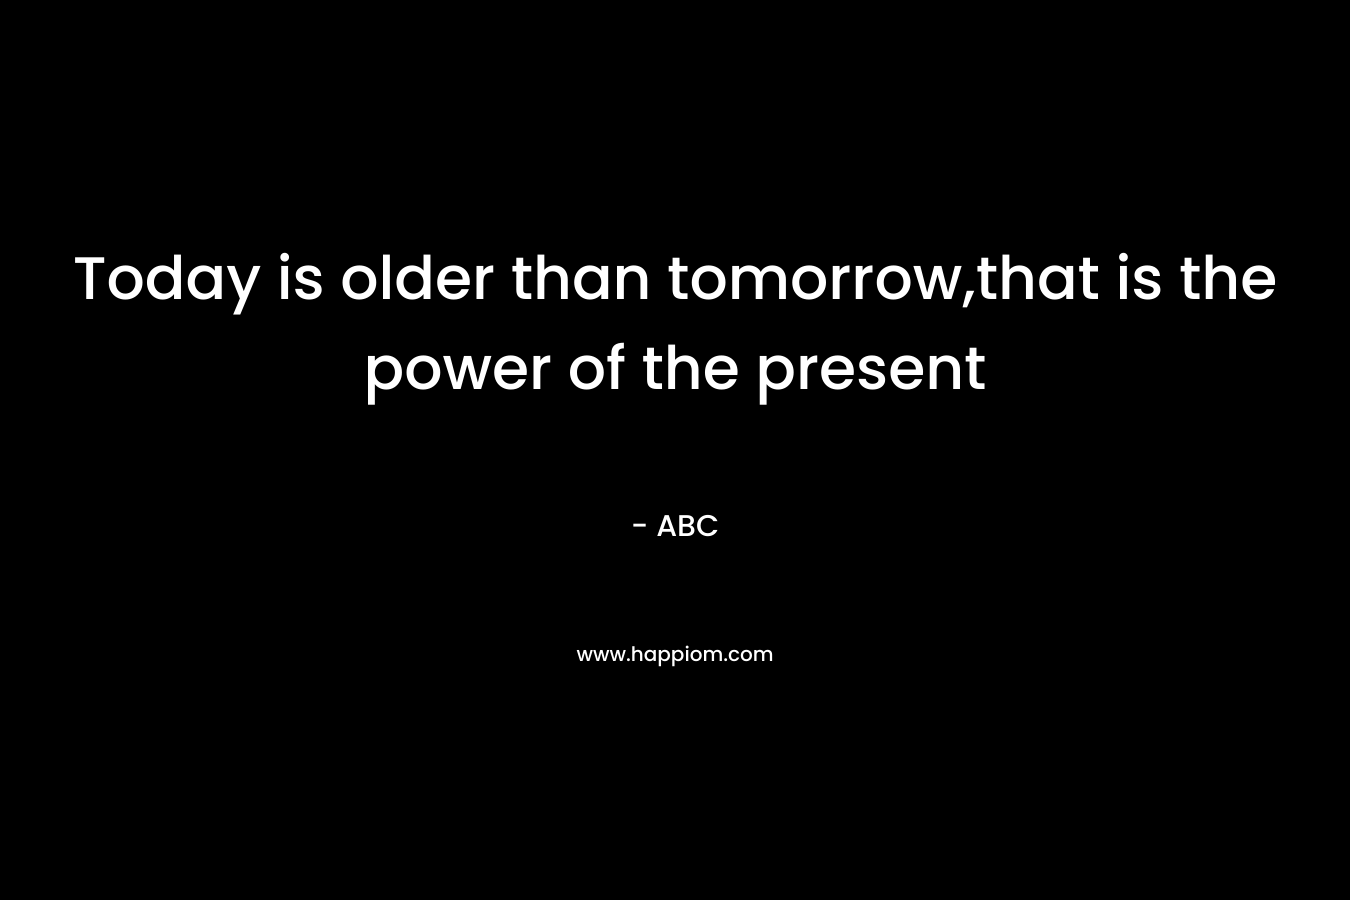 Today is older than tomorrow,that is the power of the present